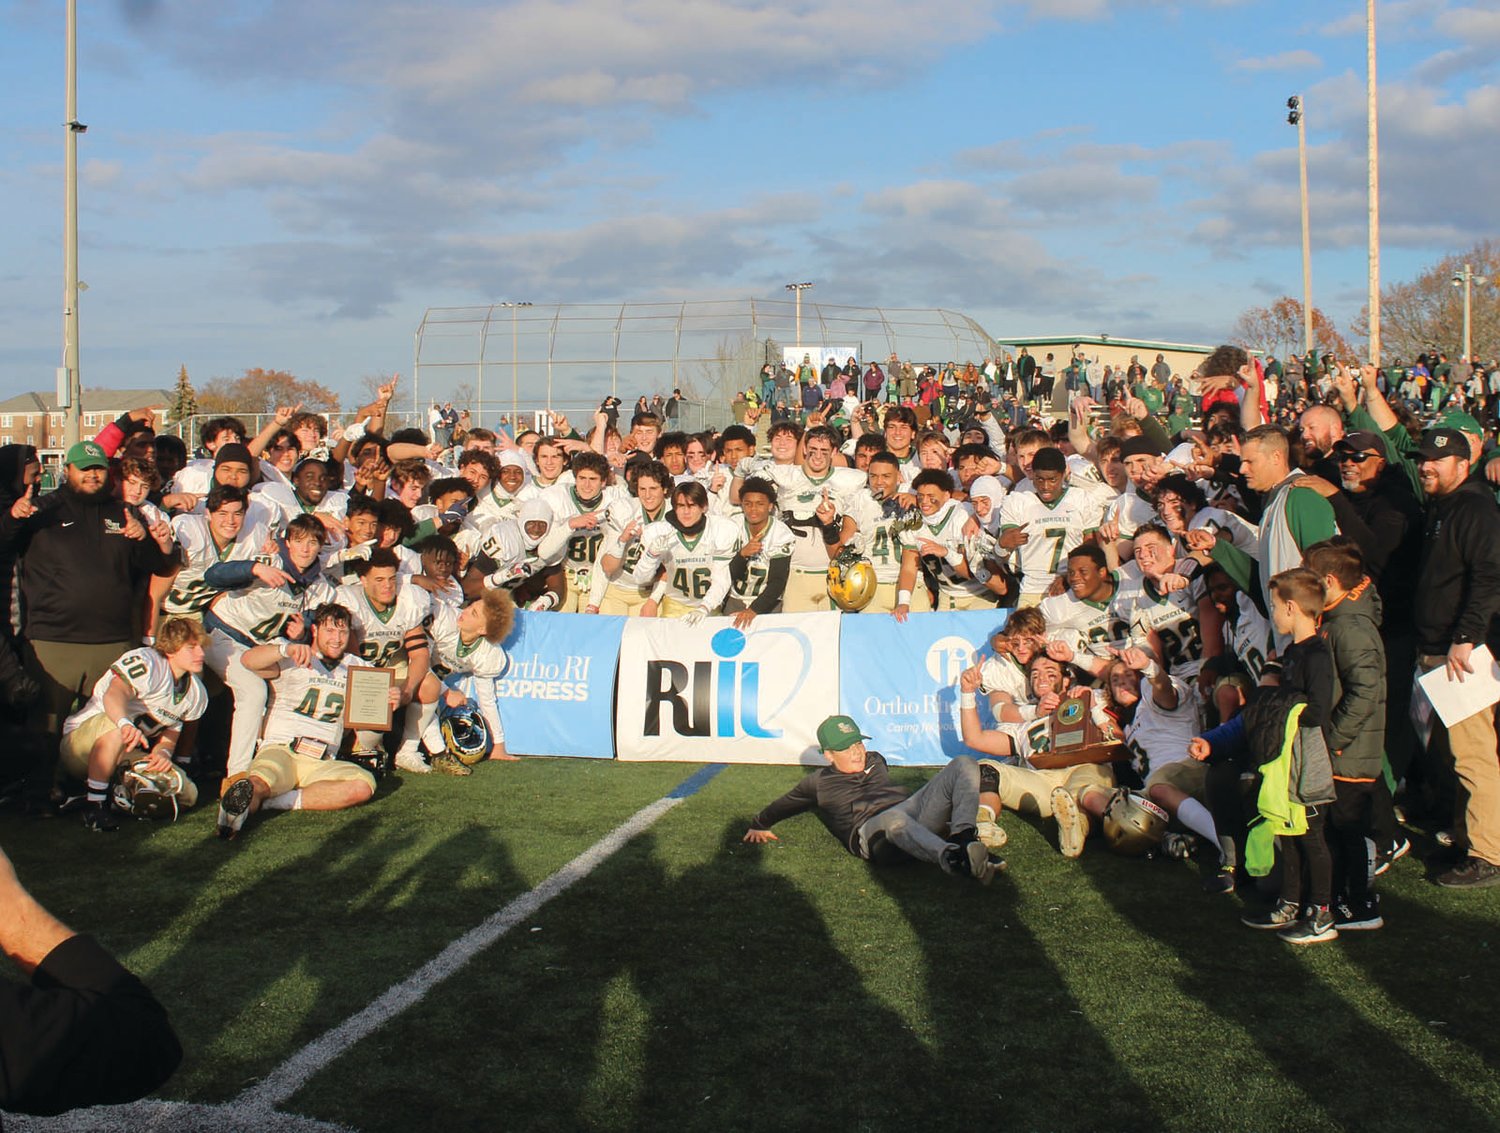 CHAMPS AGAIN: The Bishop Hendricken football team after winning the state championship over La Salle.